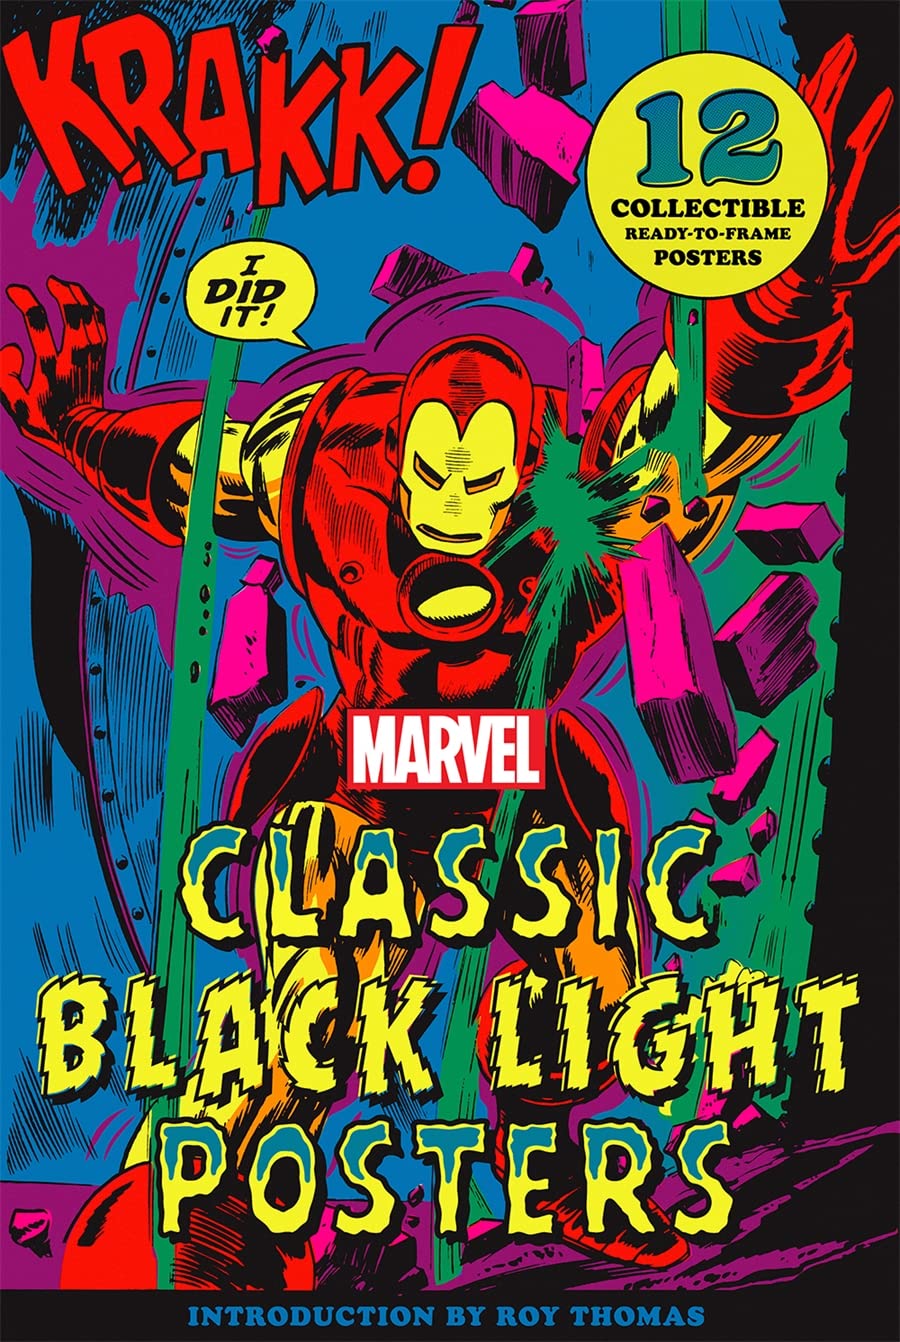 Marvel Classic Black Light Collectible Posters